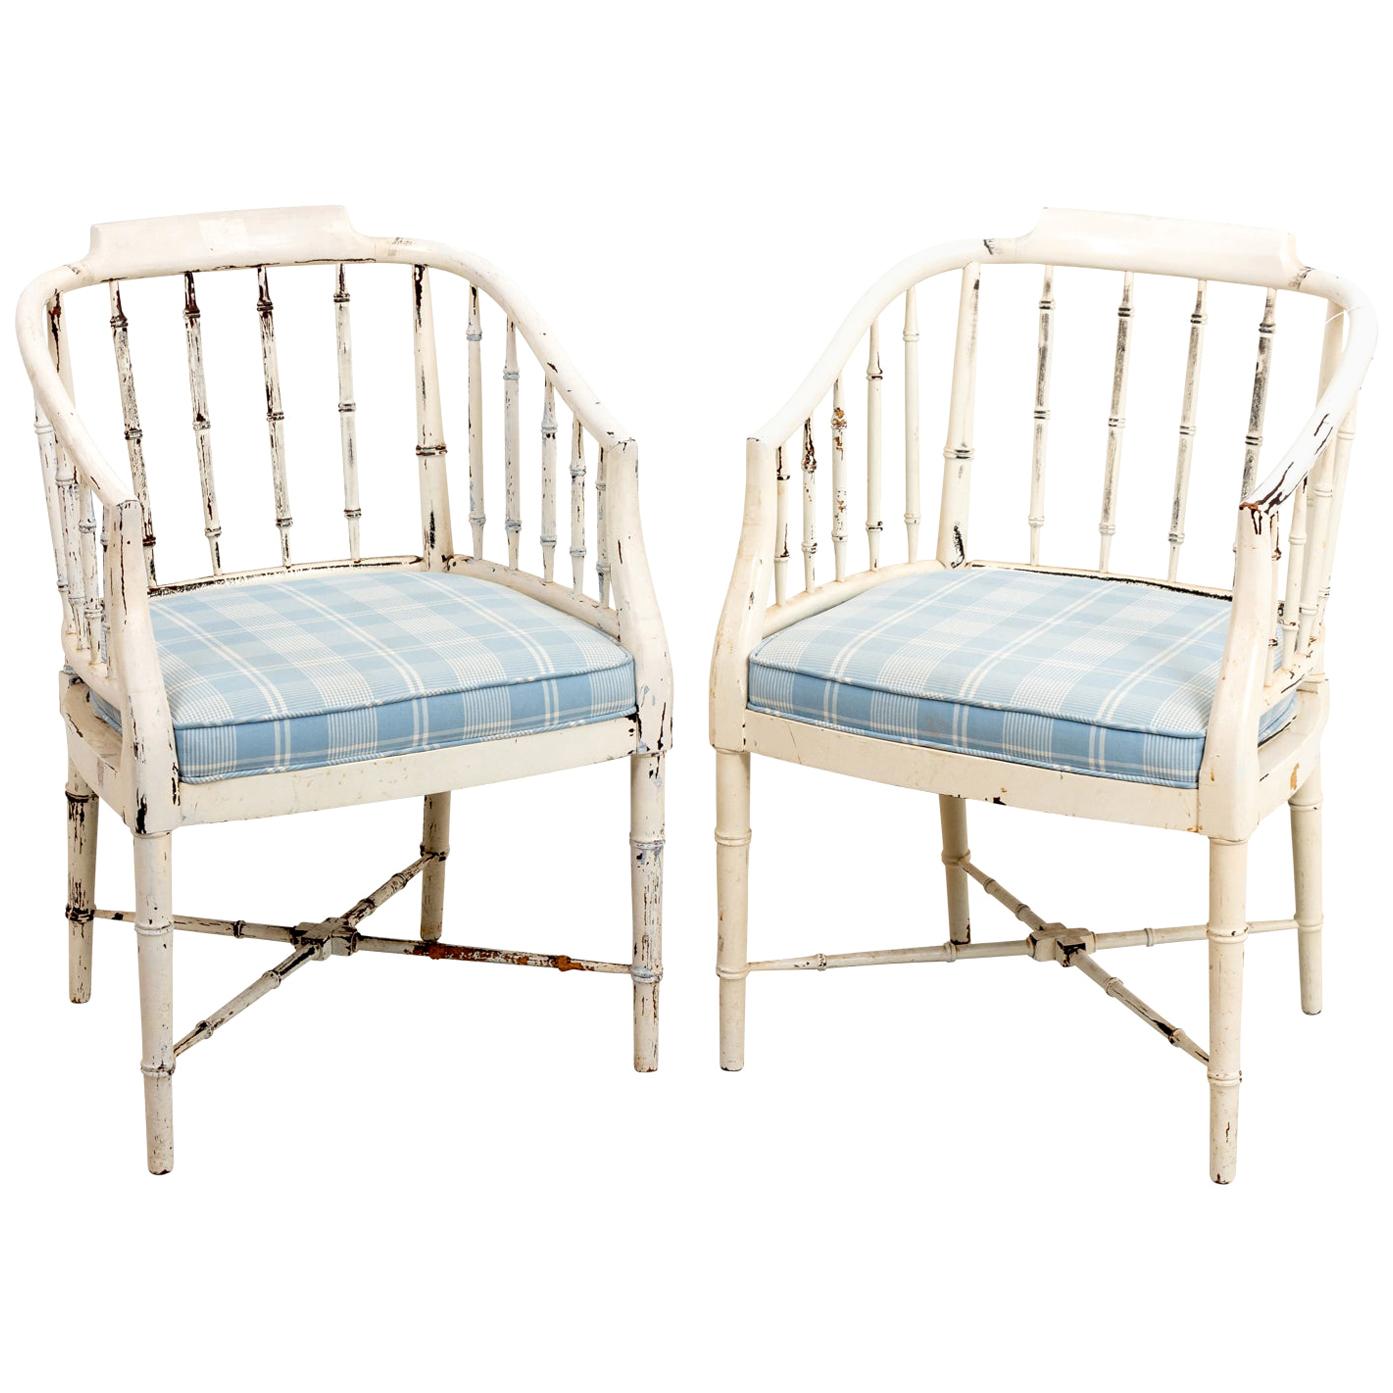 Pair of Painted and Decorated Faux Bamboo Armchairs